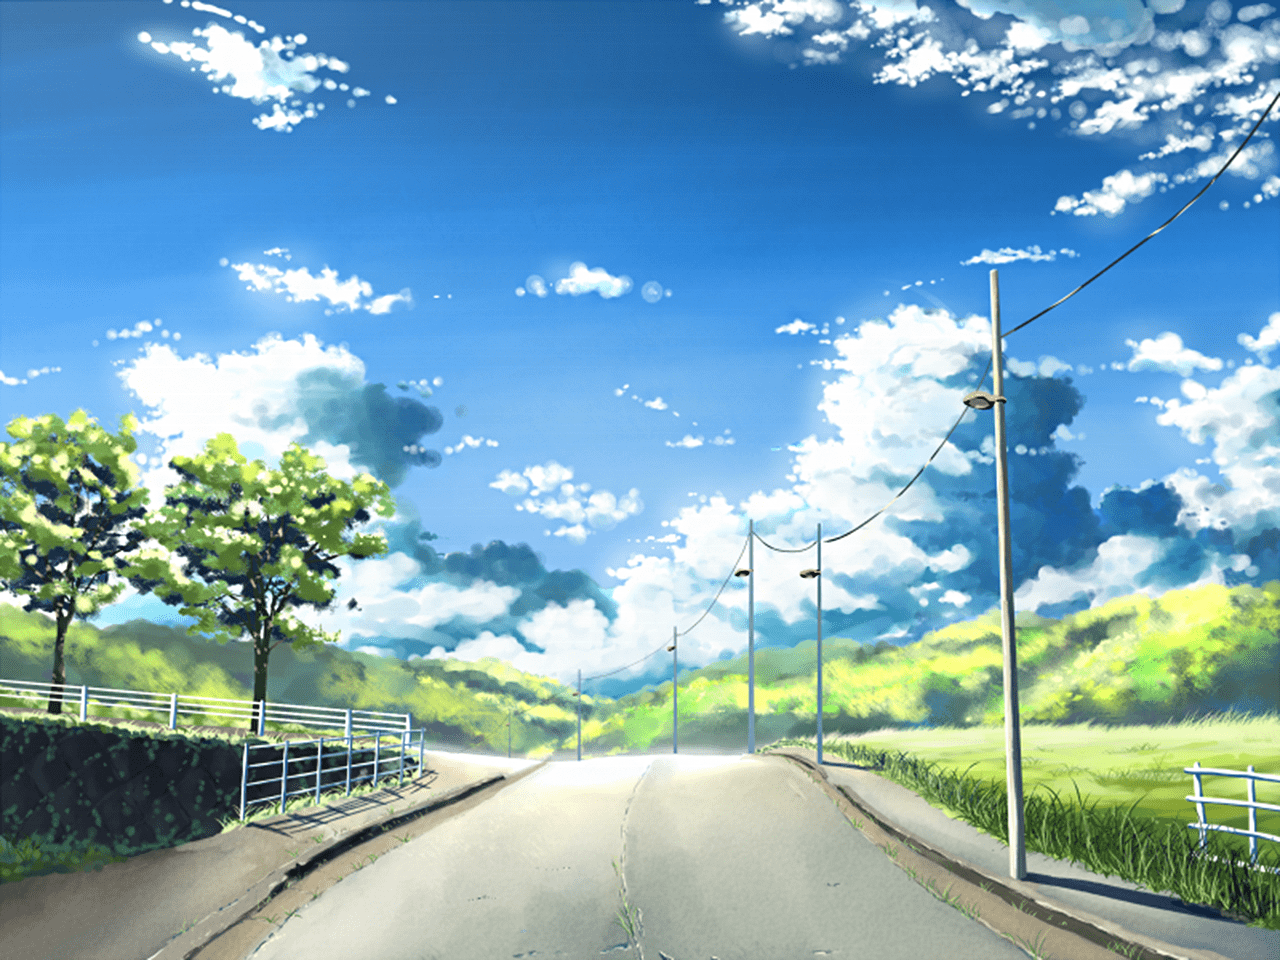 Skies and Highways Anime Backgrounds Graphic by CrittersHub · Creative  Fabrica